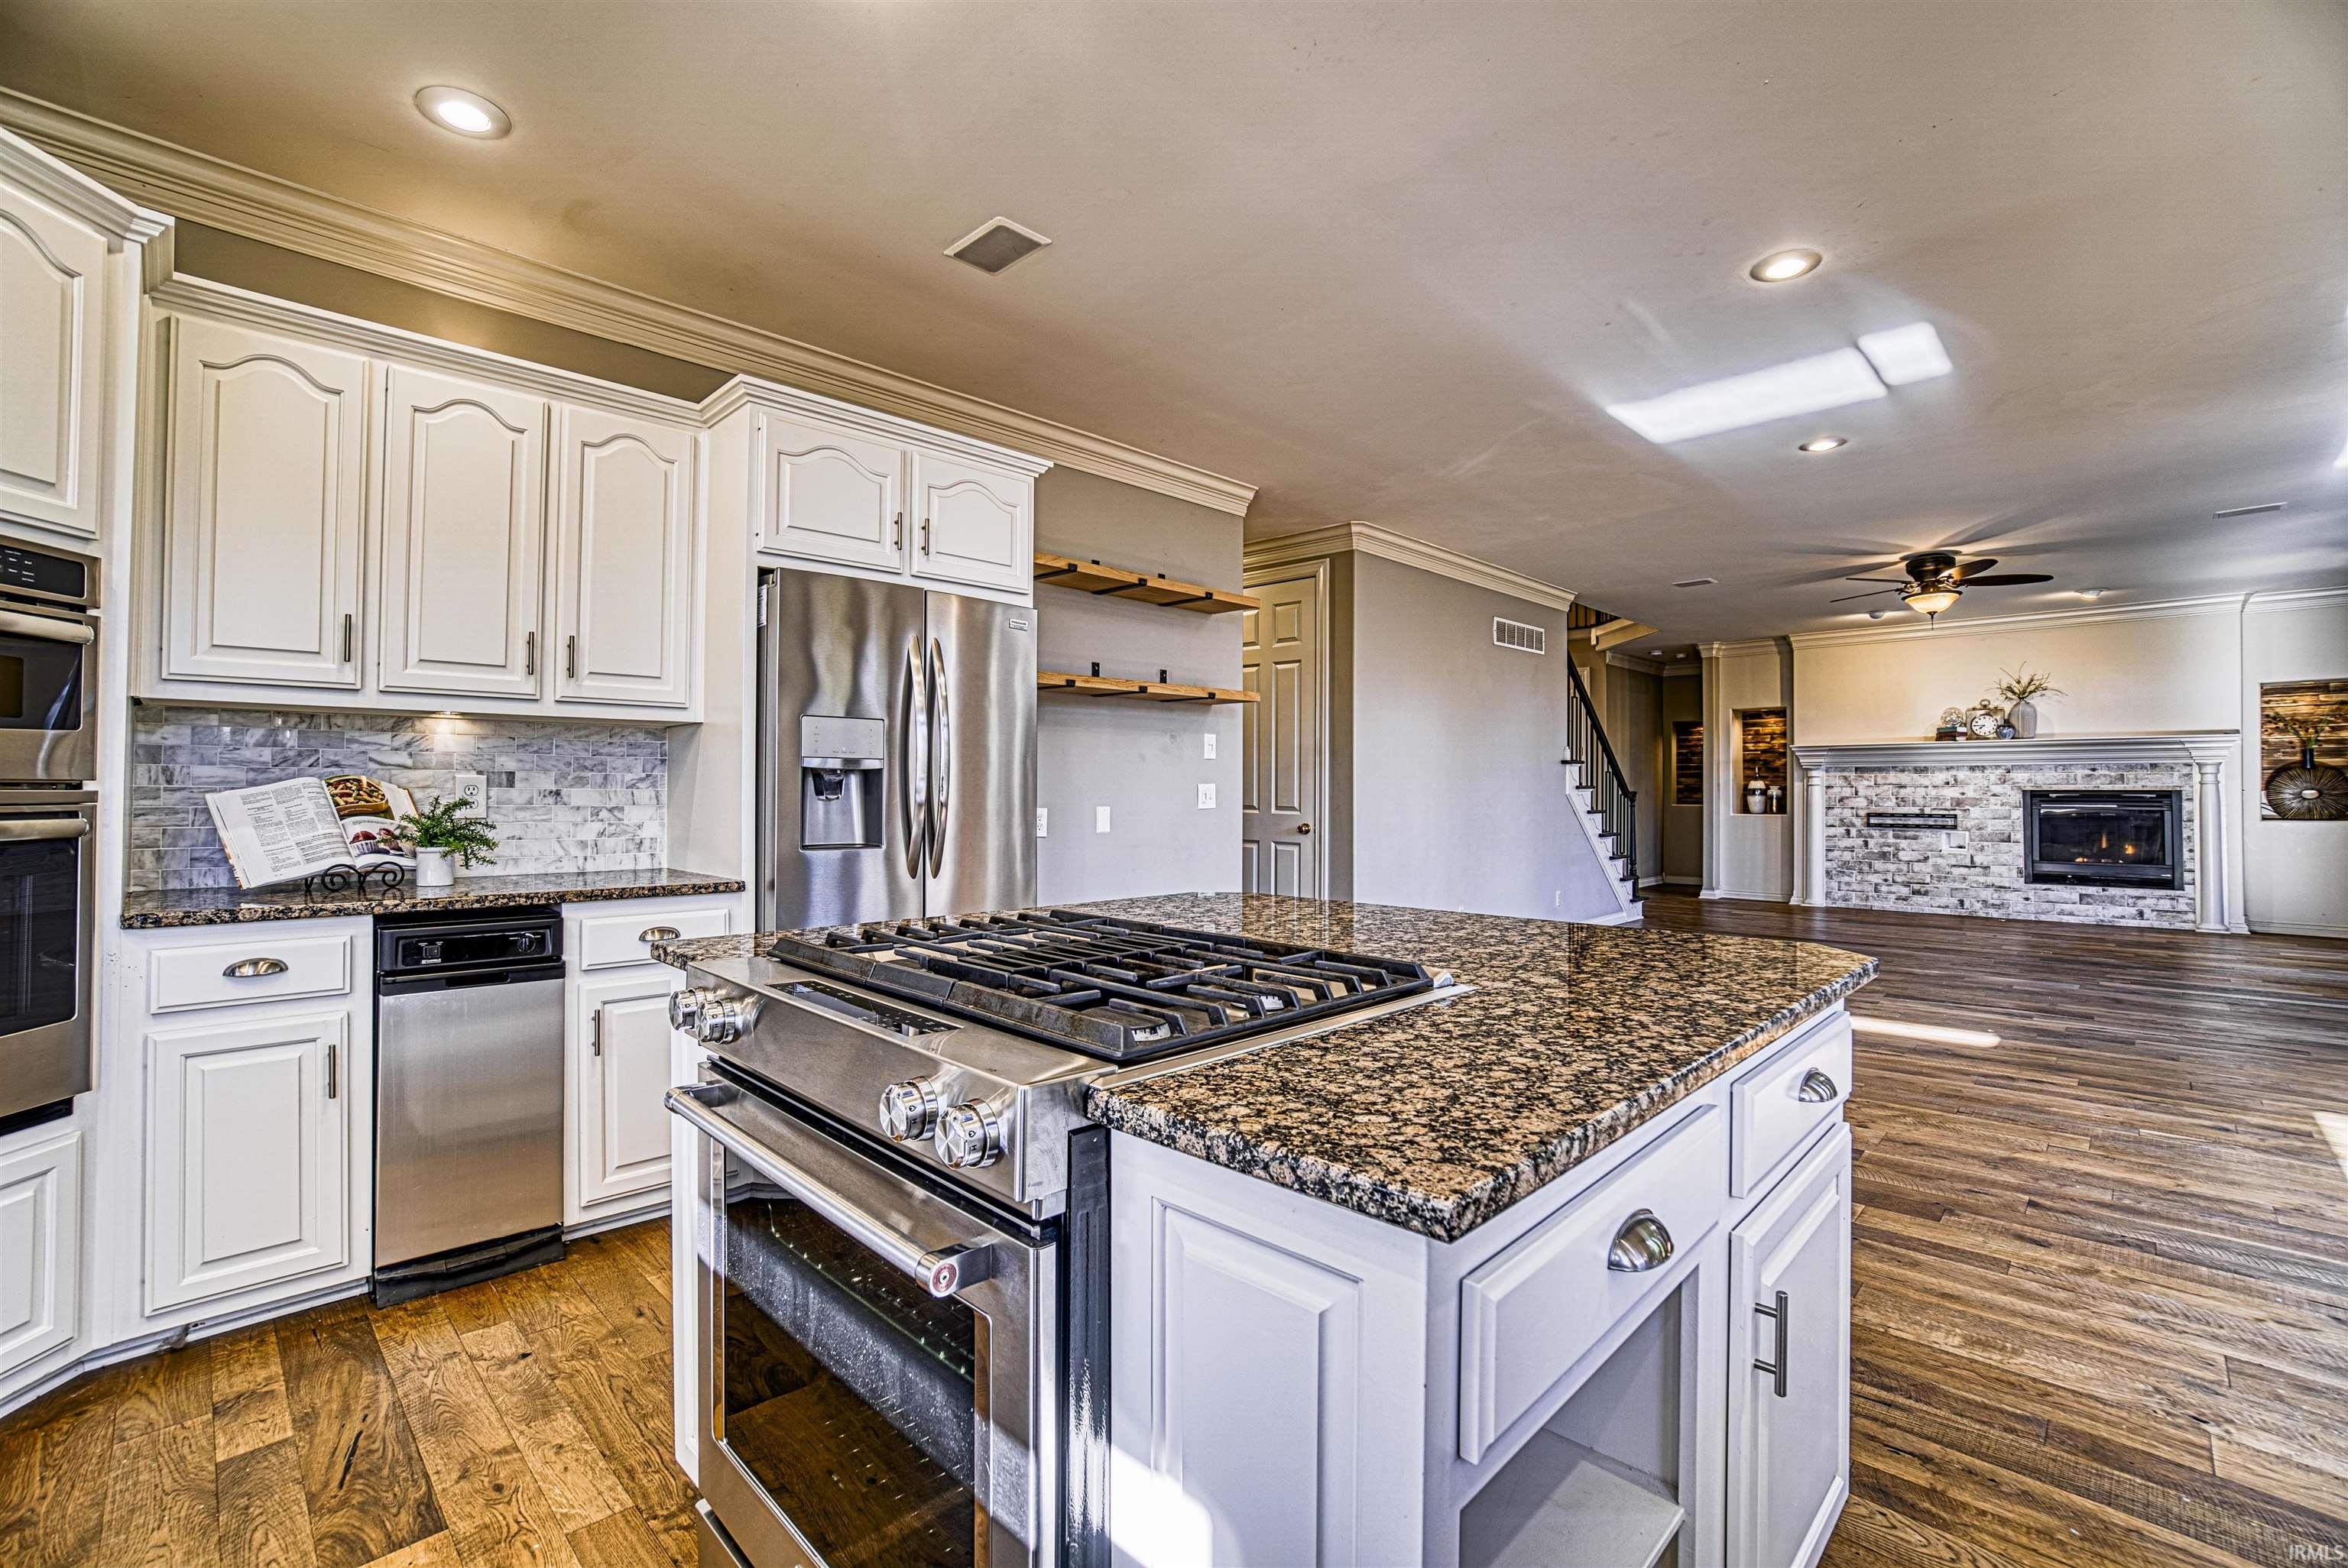 Top of the line stainless steel appliances including gas range and wall oven...